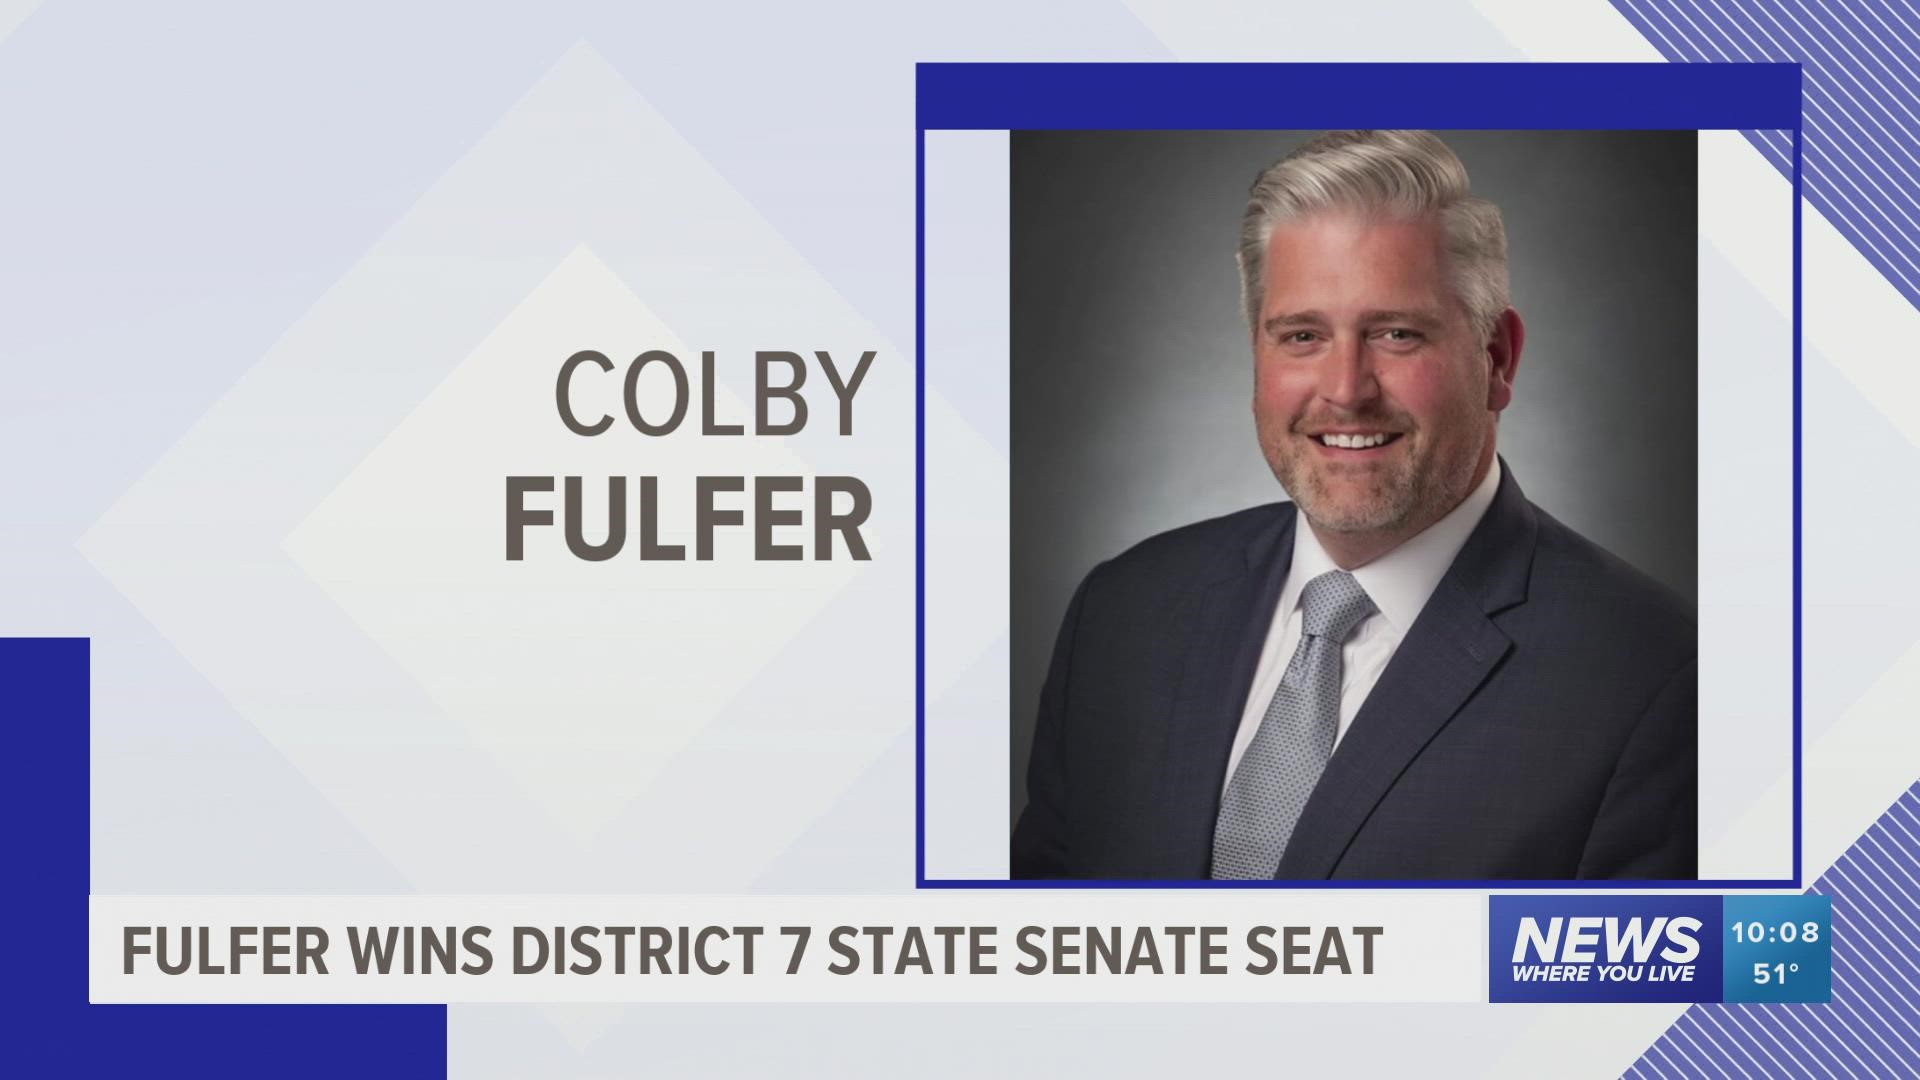 Voters in Washington County have selected Republican Colby Fulfer to take the Arkansas Senate District 7 seat.